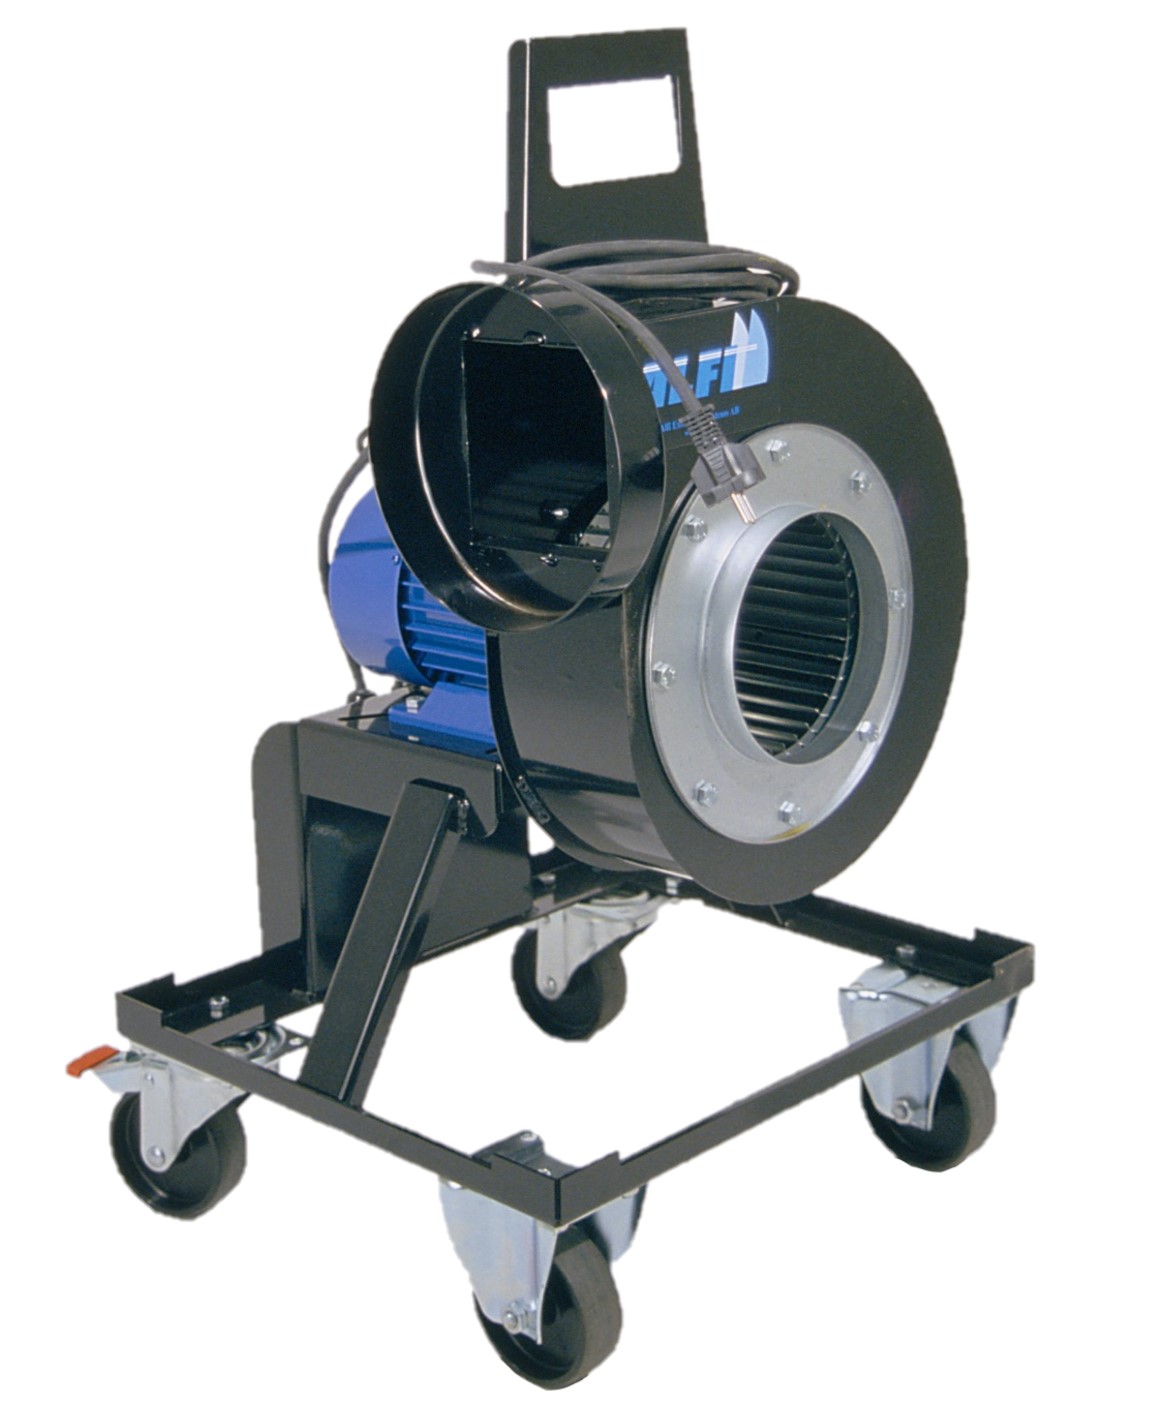 portable-p-max-vehicle-exhaust-fan - High Resolution Image 600